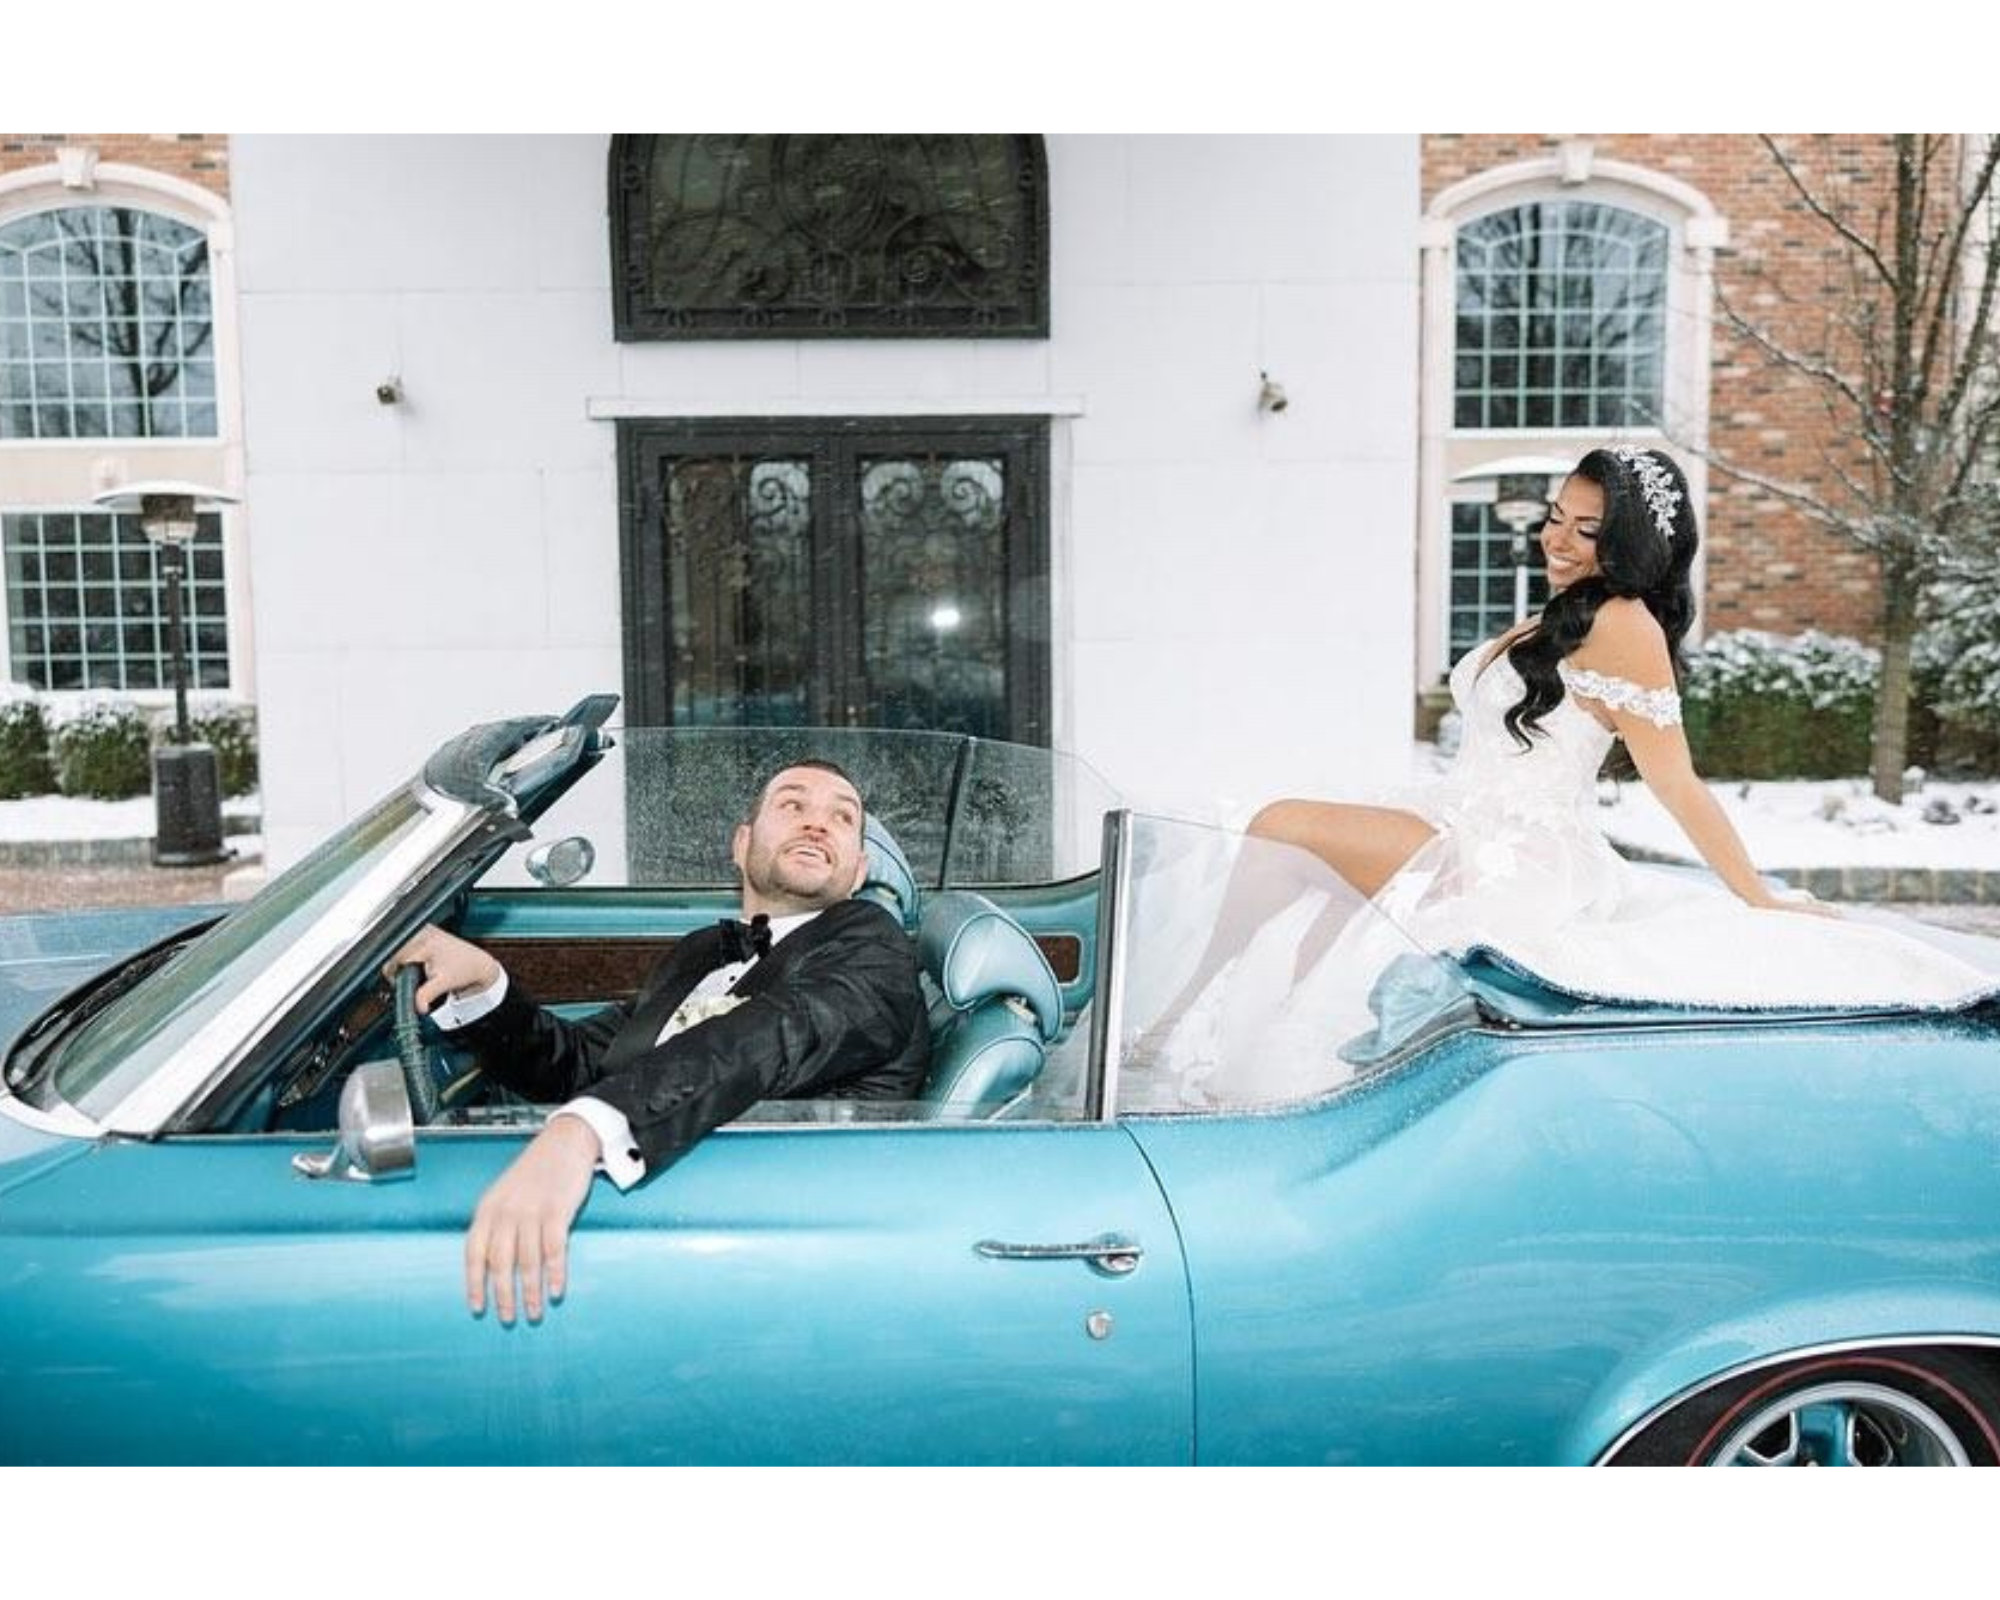 Cassandra rides in the back of a turquoise vintage convertible while her groom drives.